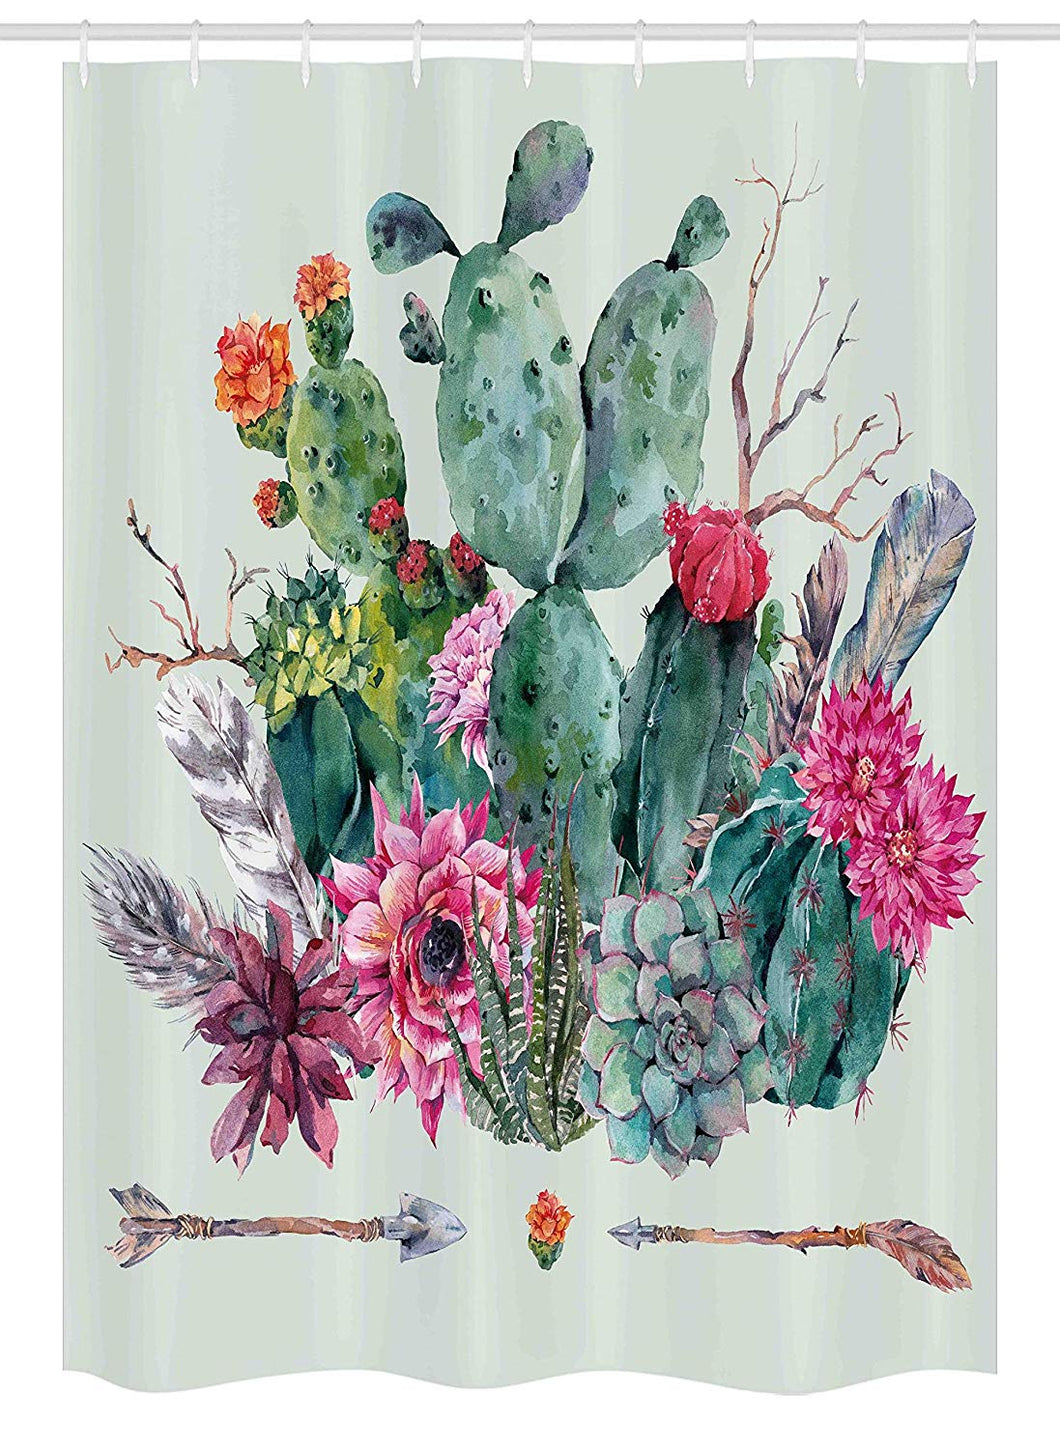 Ambesonne Cactus Stall Shower Curtain, Spring Garden with Boho Style Bouquet of Thorny Plants Blossoms Arrows Feathers, Fabric Bathroom Decor Set with Hooks, 54